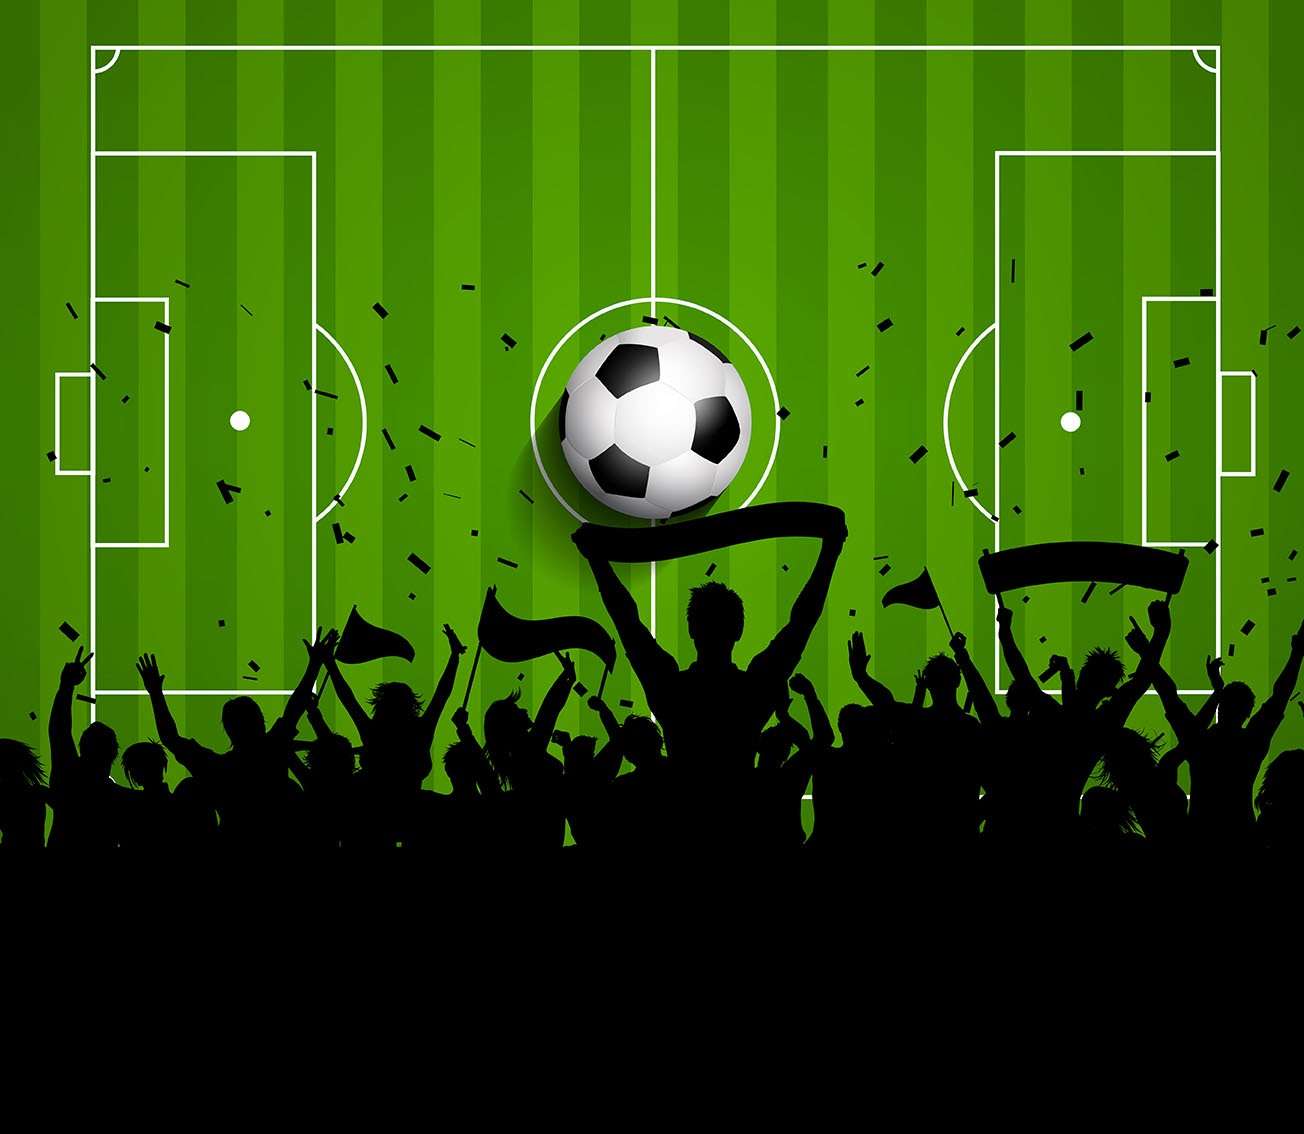 Soccer or Football crowd background